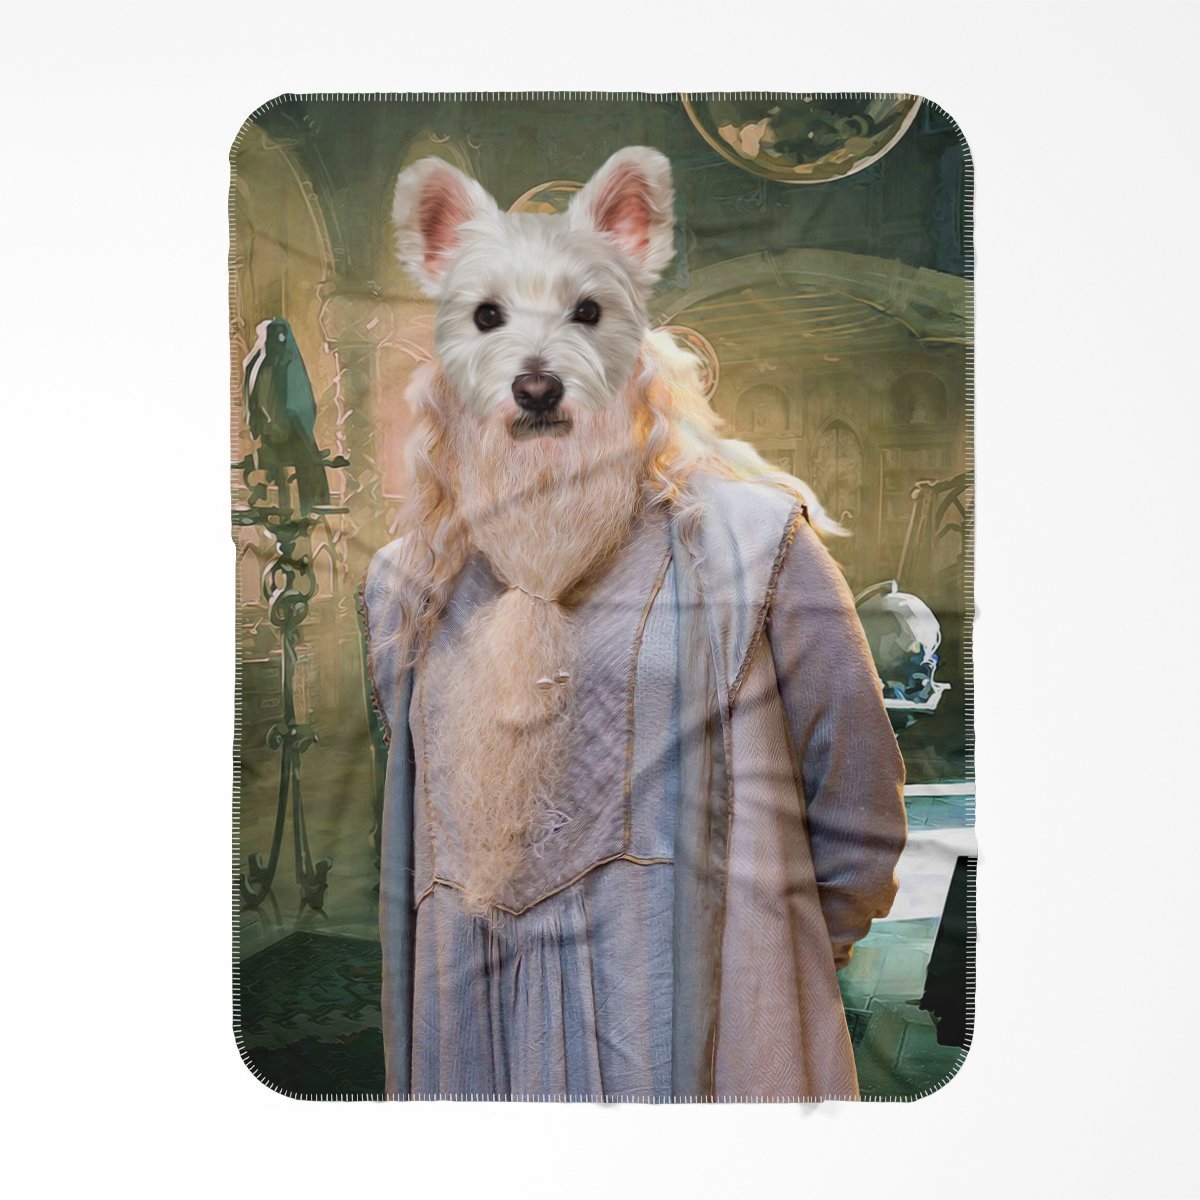 Dumbledore (Harry Potter Inspired): Custom Pet Blanket - Paw & Glory - #pet portraits# - #dog portraits# - #pet portraits uk#Paw and glory, Pet portraits blanket,personalized blanket dog, blanket with dogs face on it, your cat on a blanket, blanket with my dog on it, personalized dog fleece blankets